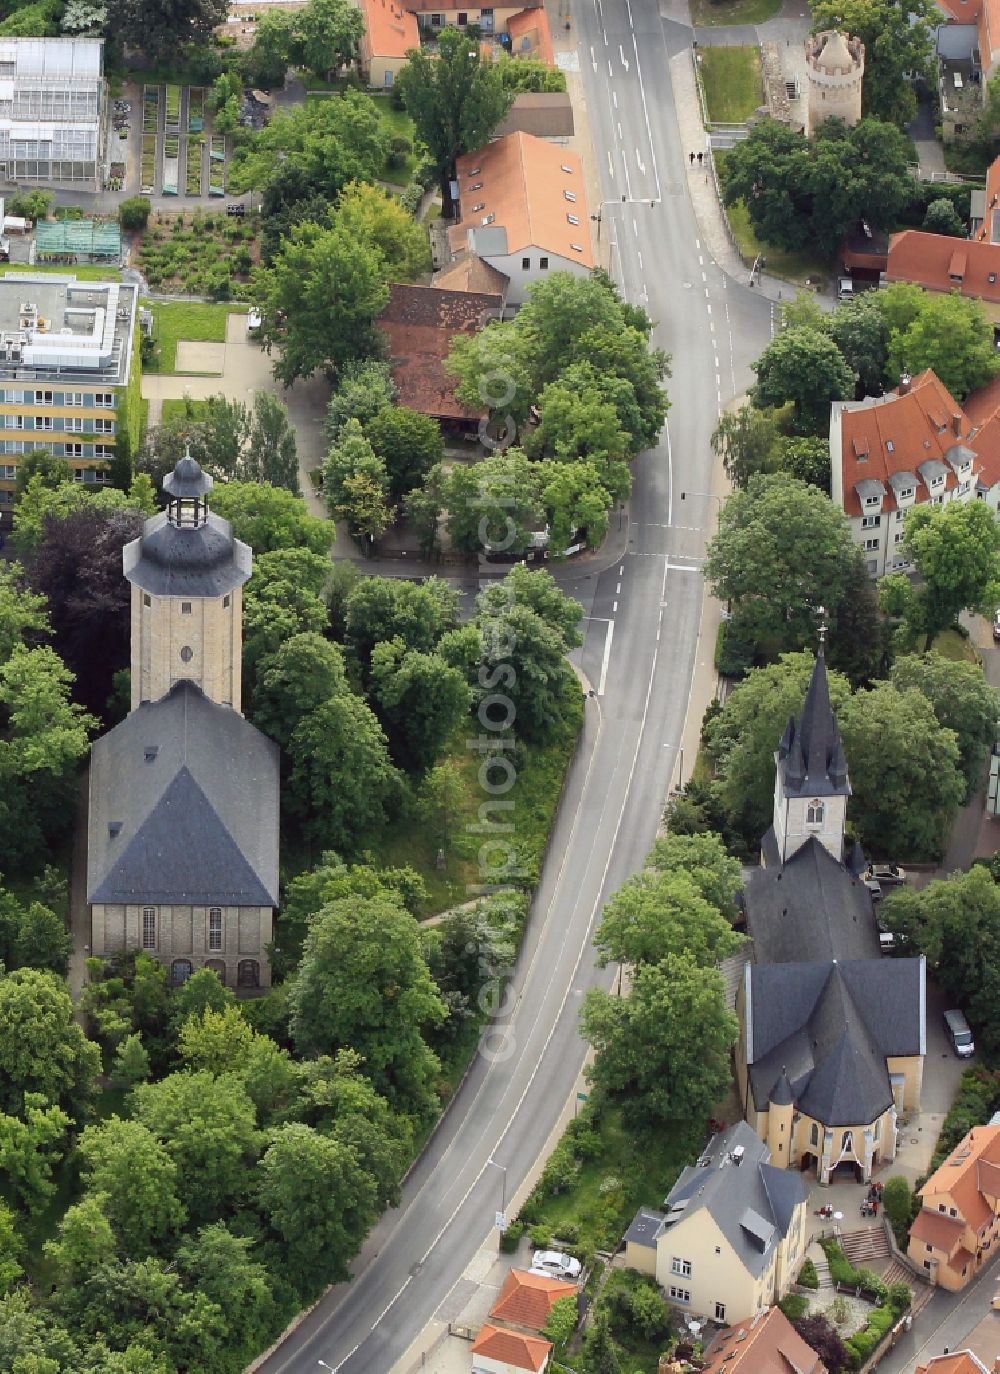 Aerial image Jena - Left and right of the road of June 17, in the center of Jena in Thuringia are the peace church and the Catholic Church of St. John Baptist Church. The peace church, which was formerly known as God's Acre Church or New St. John's Church, stands on the site of St. John's Cemetery. At the top of the screen is the Powder Tower to see a part of the former city wall of Jena